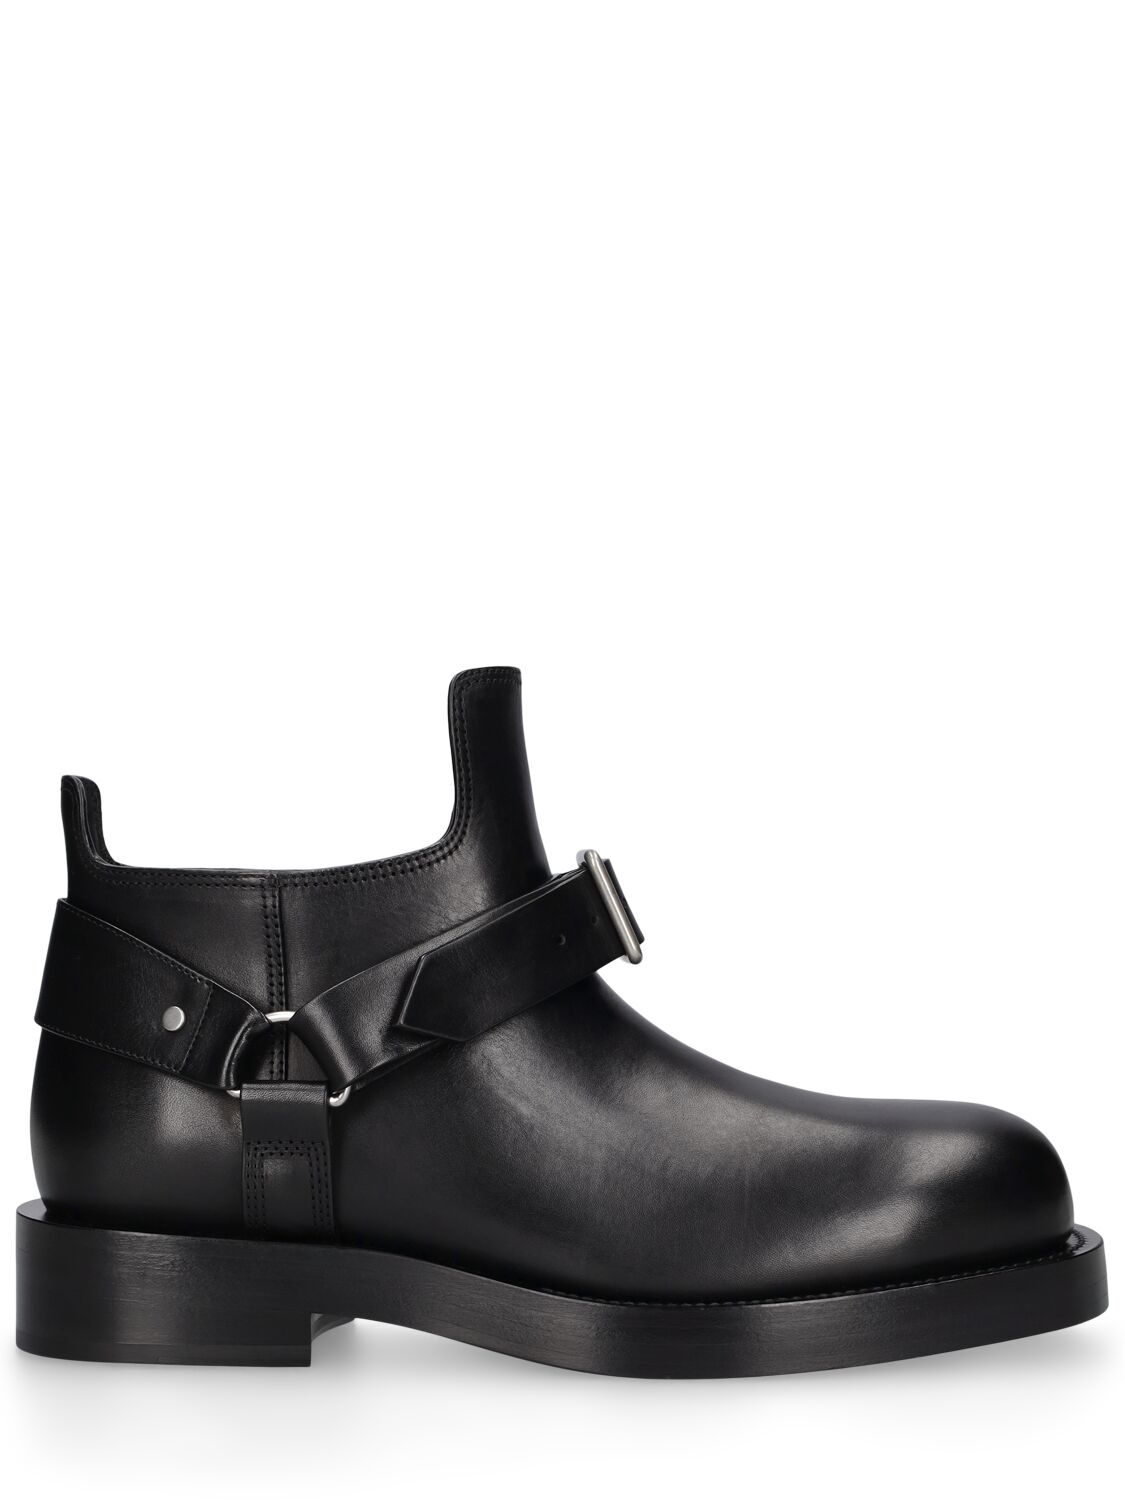 Burberry Mf Saddle Mini Leather Ankle Boots In Black